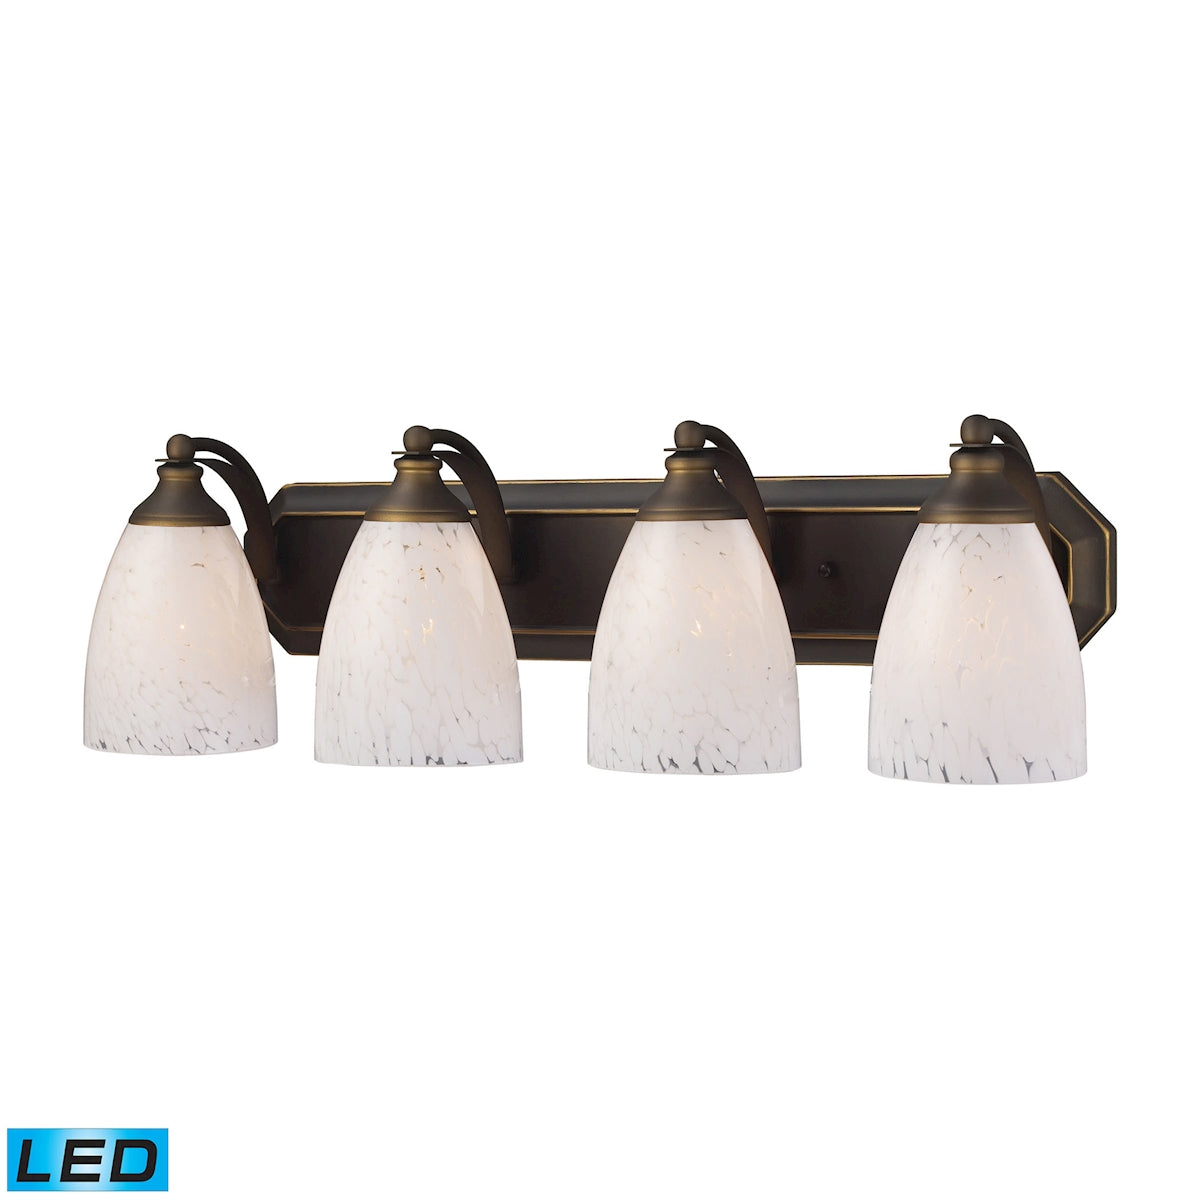 ELK Lighting 570-4B-SW-LED Mix-N-Match Vanity 4-Light Wall Lamp in Aged Bronze with Snow White Glass - Includes LED Bulbs